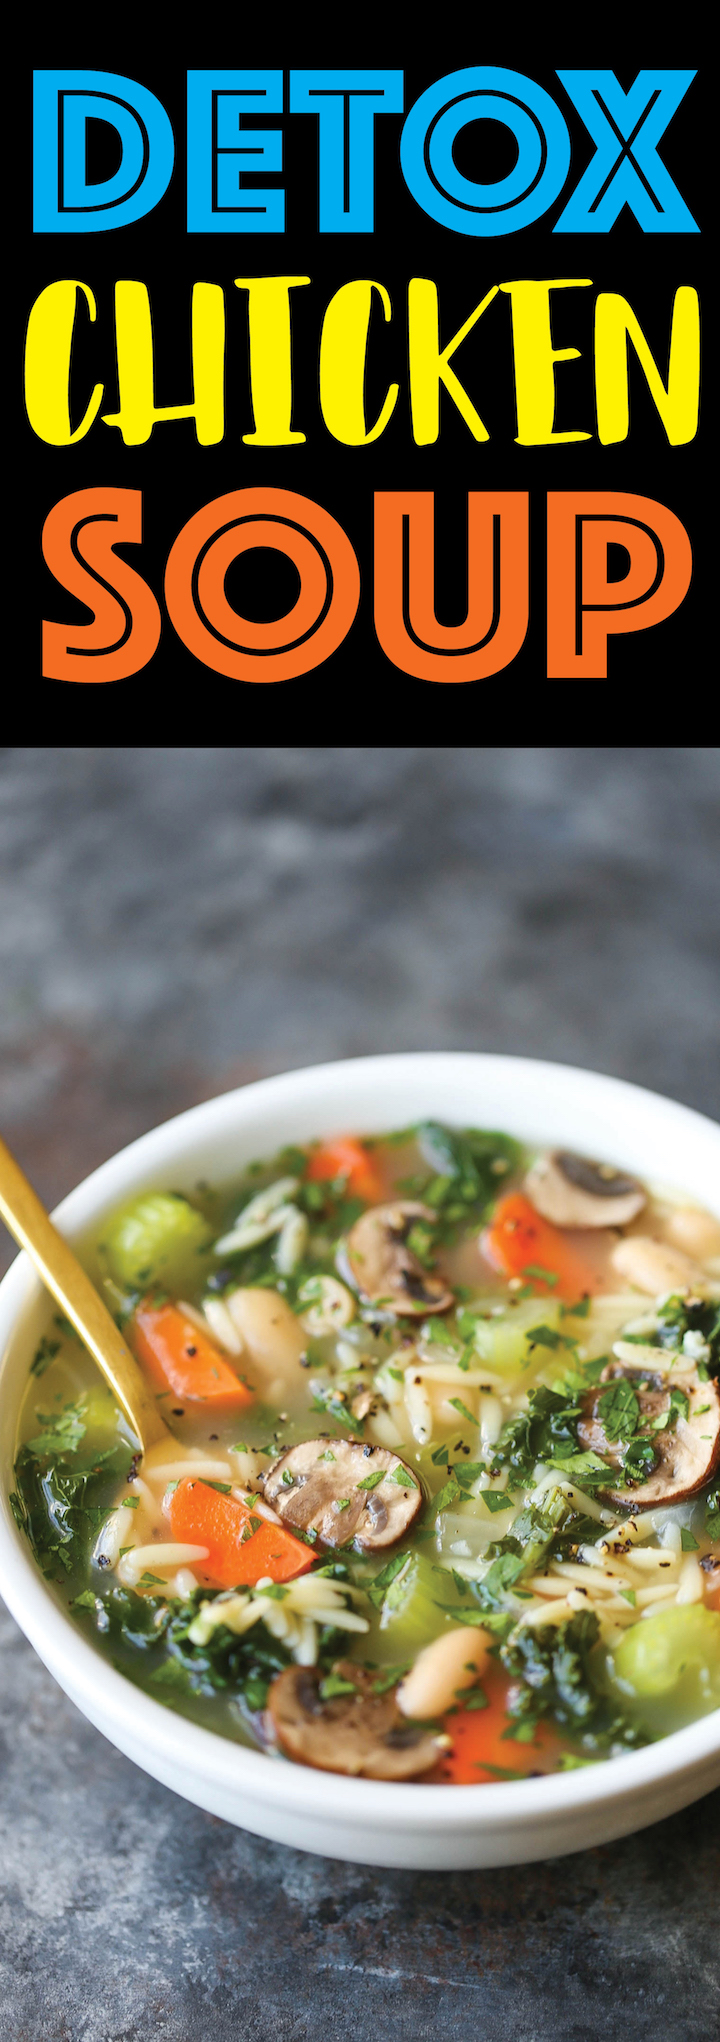 Detox Chicken Soup - Cleansing, immune-boosting soup packed with all the good stuff (kale, mushrooms, celery, carrots, etc.) without compromising any taste!